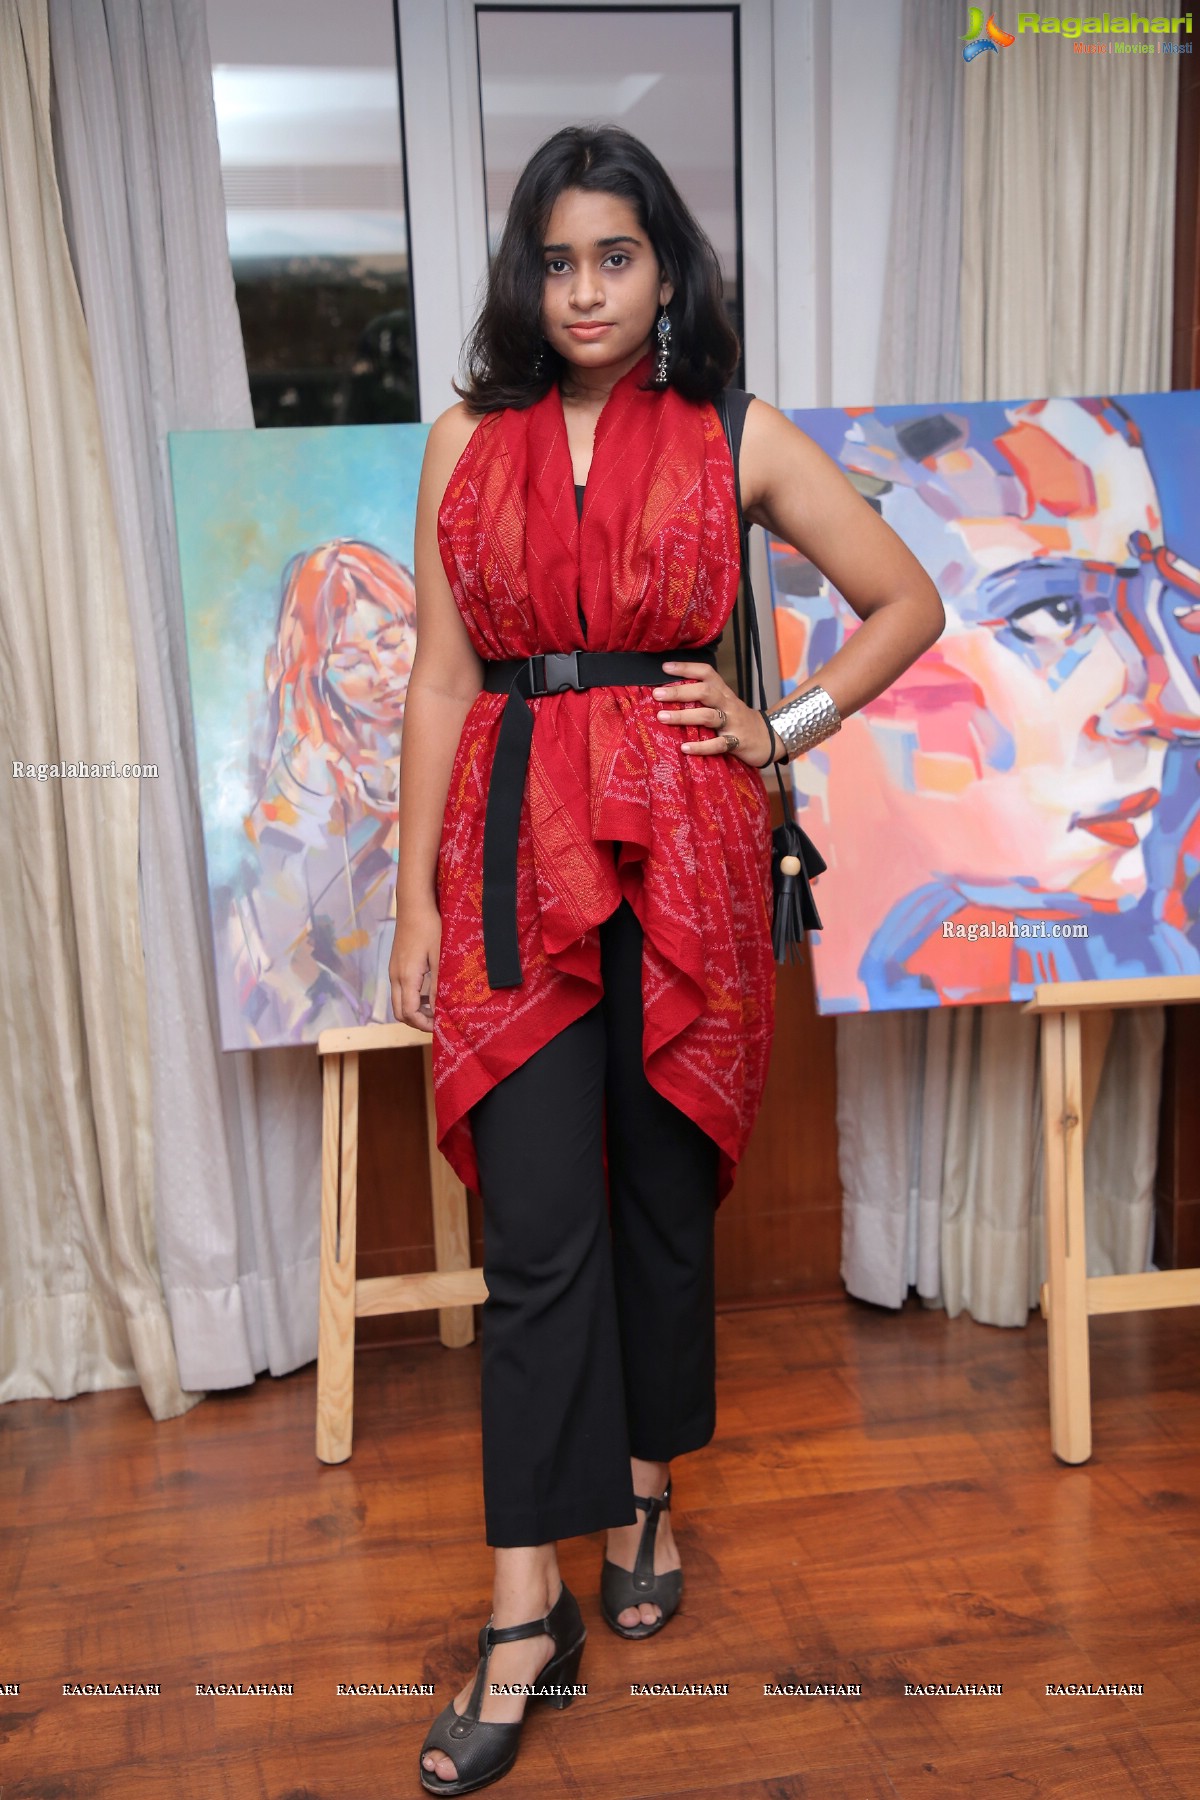 Illustrious - The Art and Fashion Walk at Visual Art Gallery